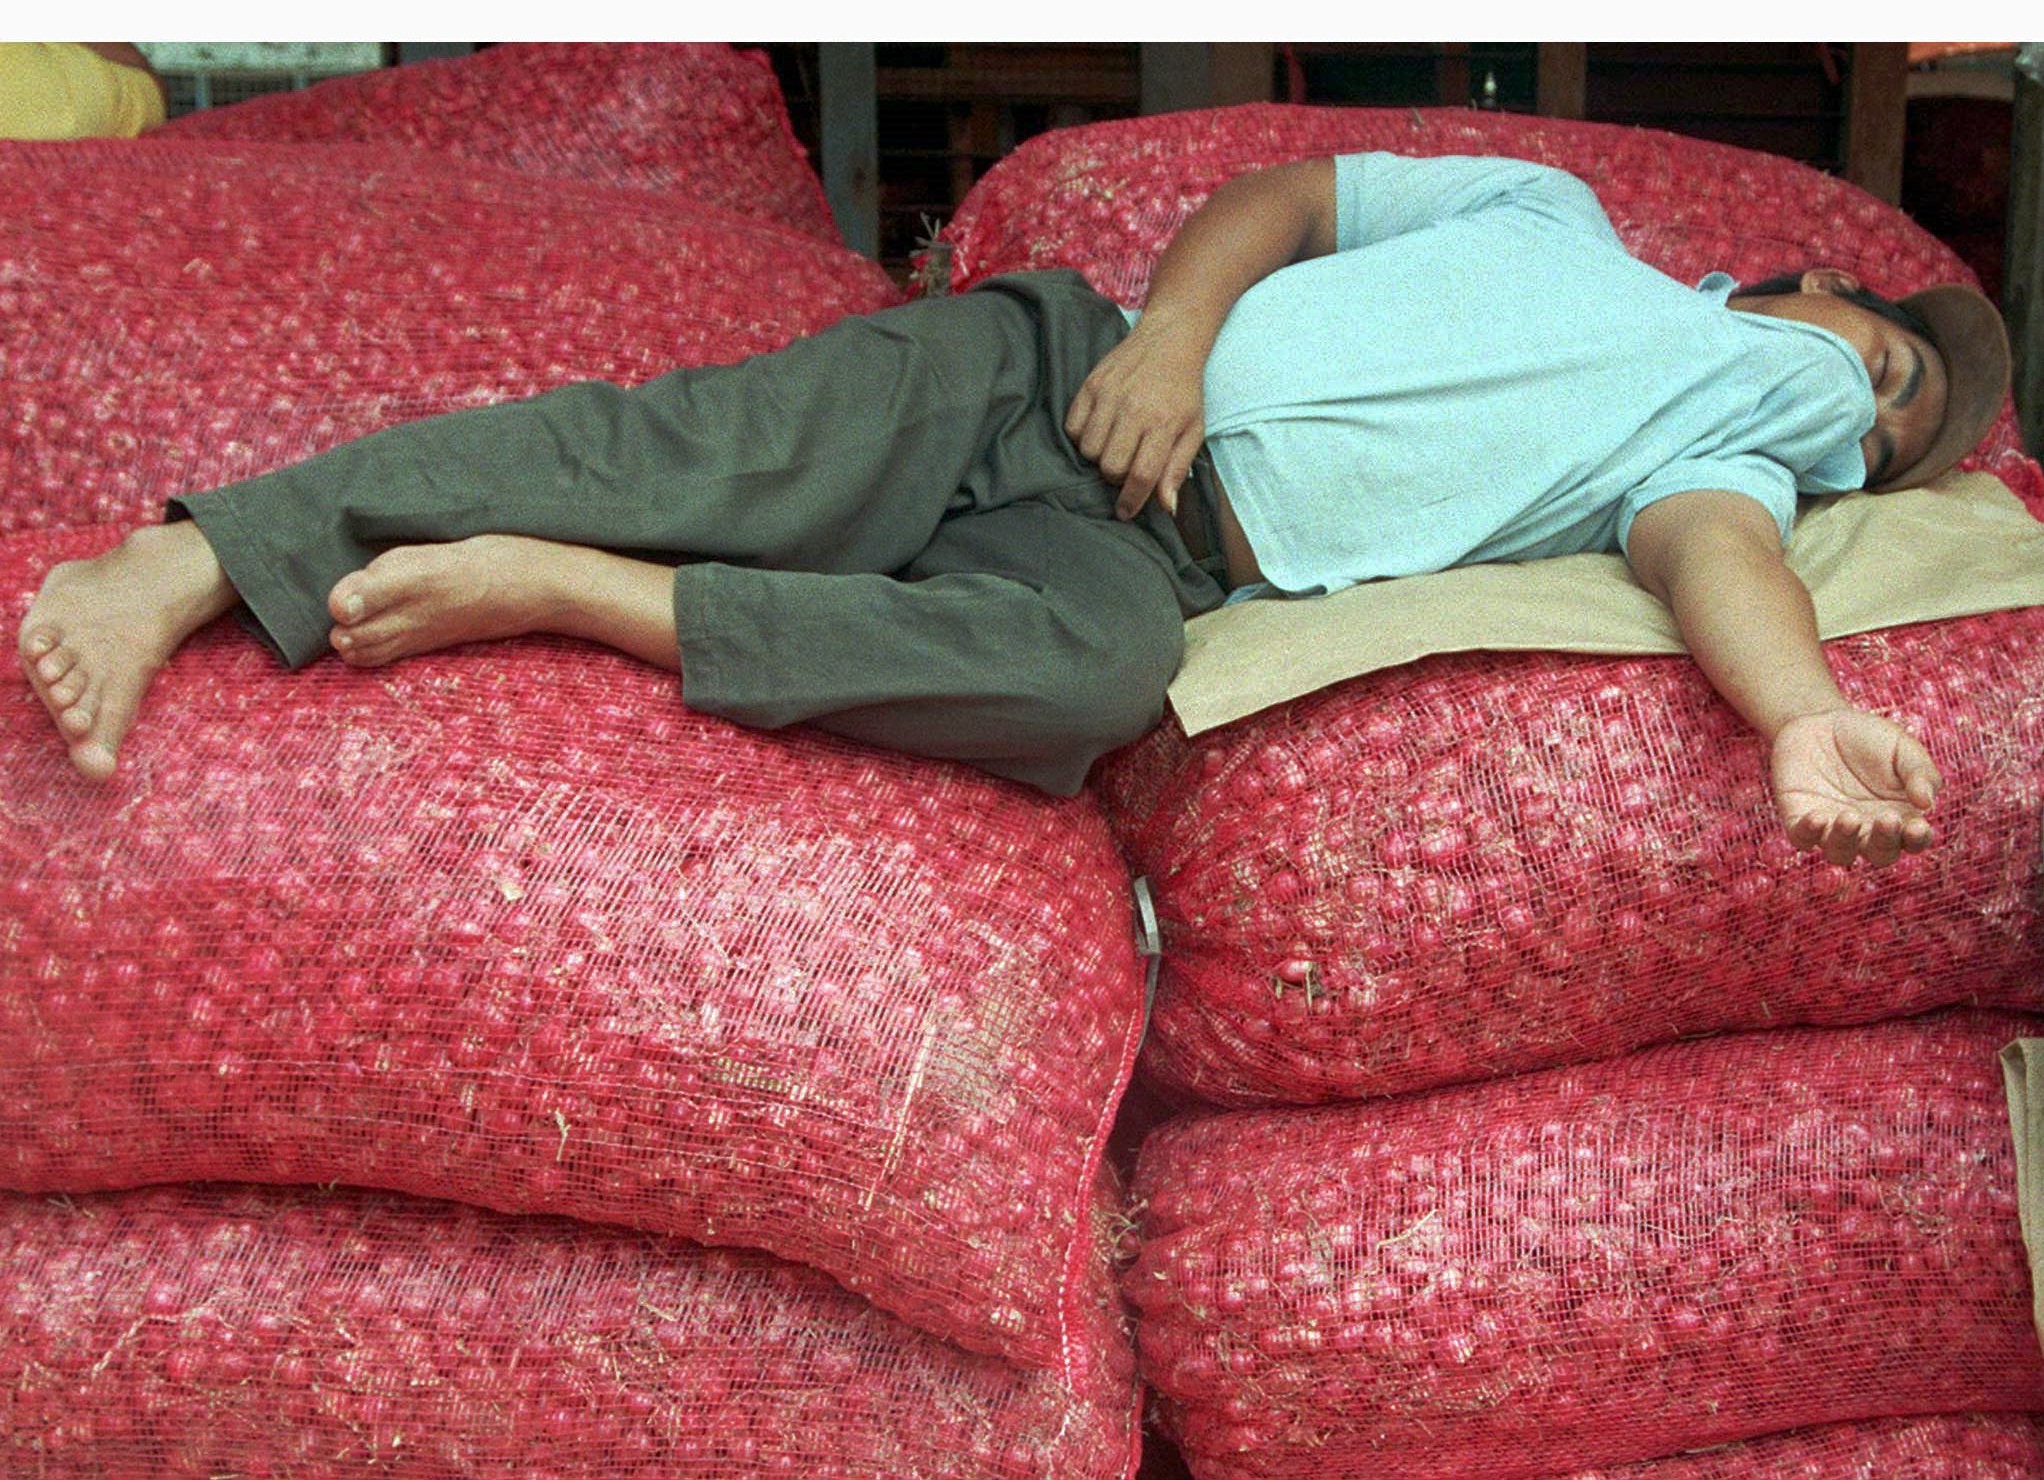 An exhausted onion trader catches forty winks on top of piles of his merchandise. Photo: Reuters